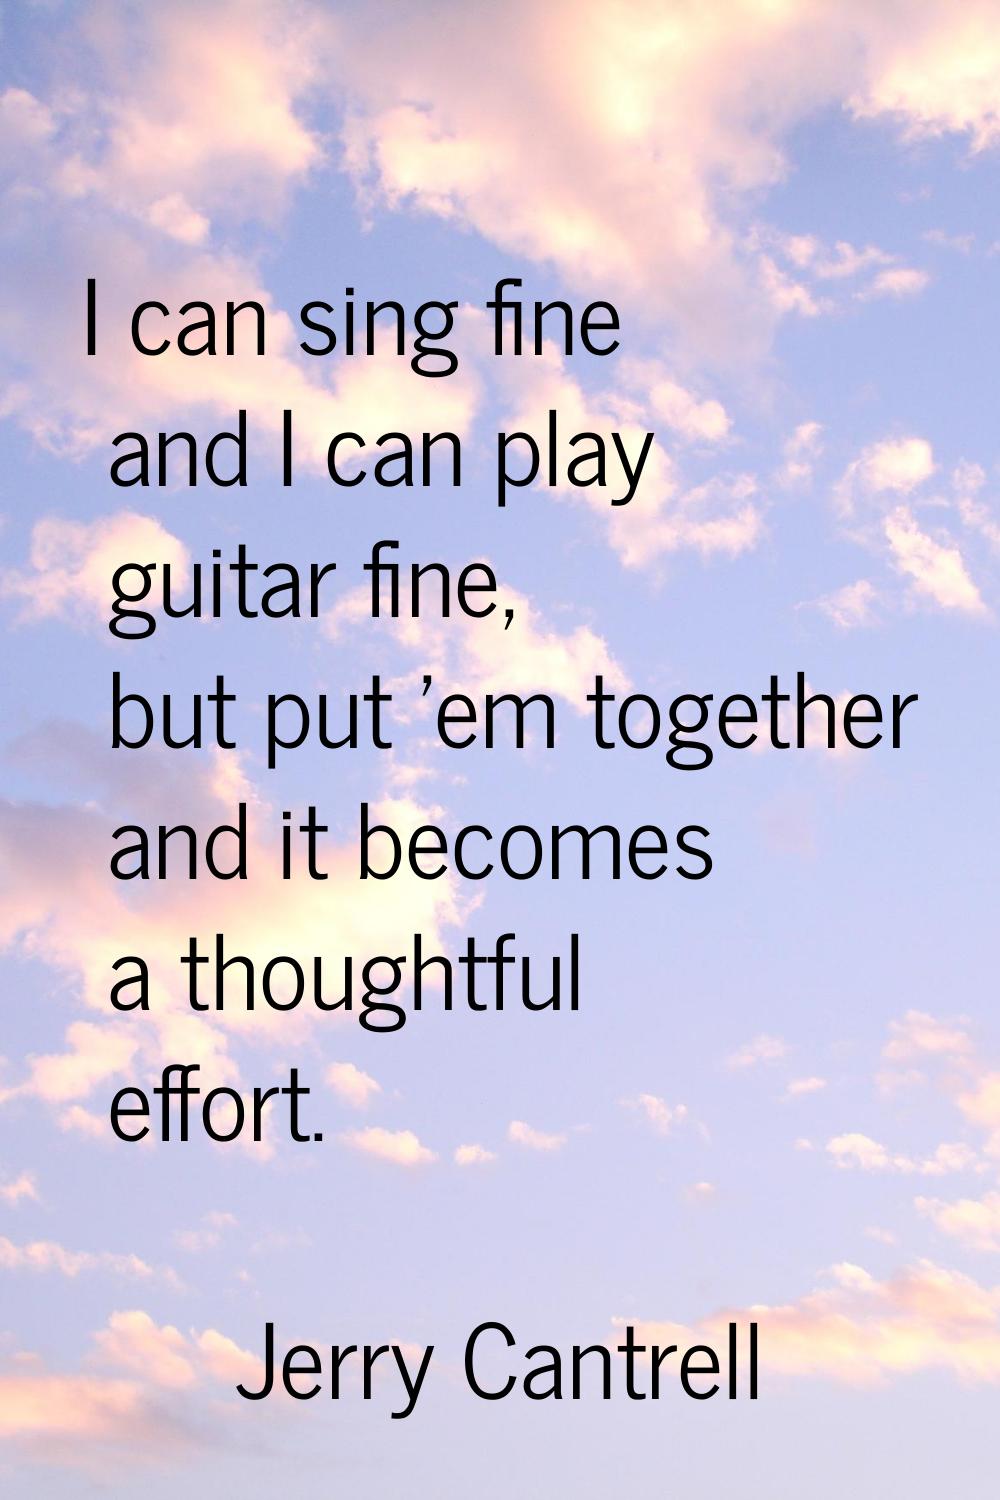 I can sing fine and I can play guitar fine, but put 'em together and it becomes a thoughtful effort